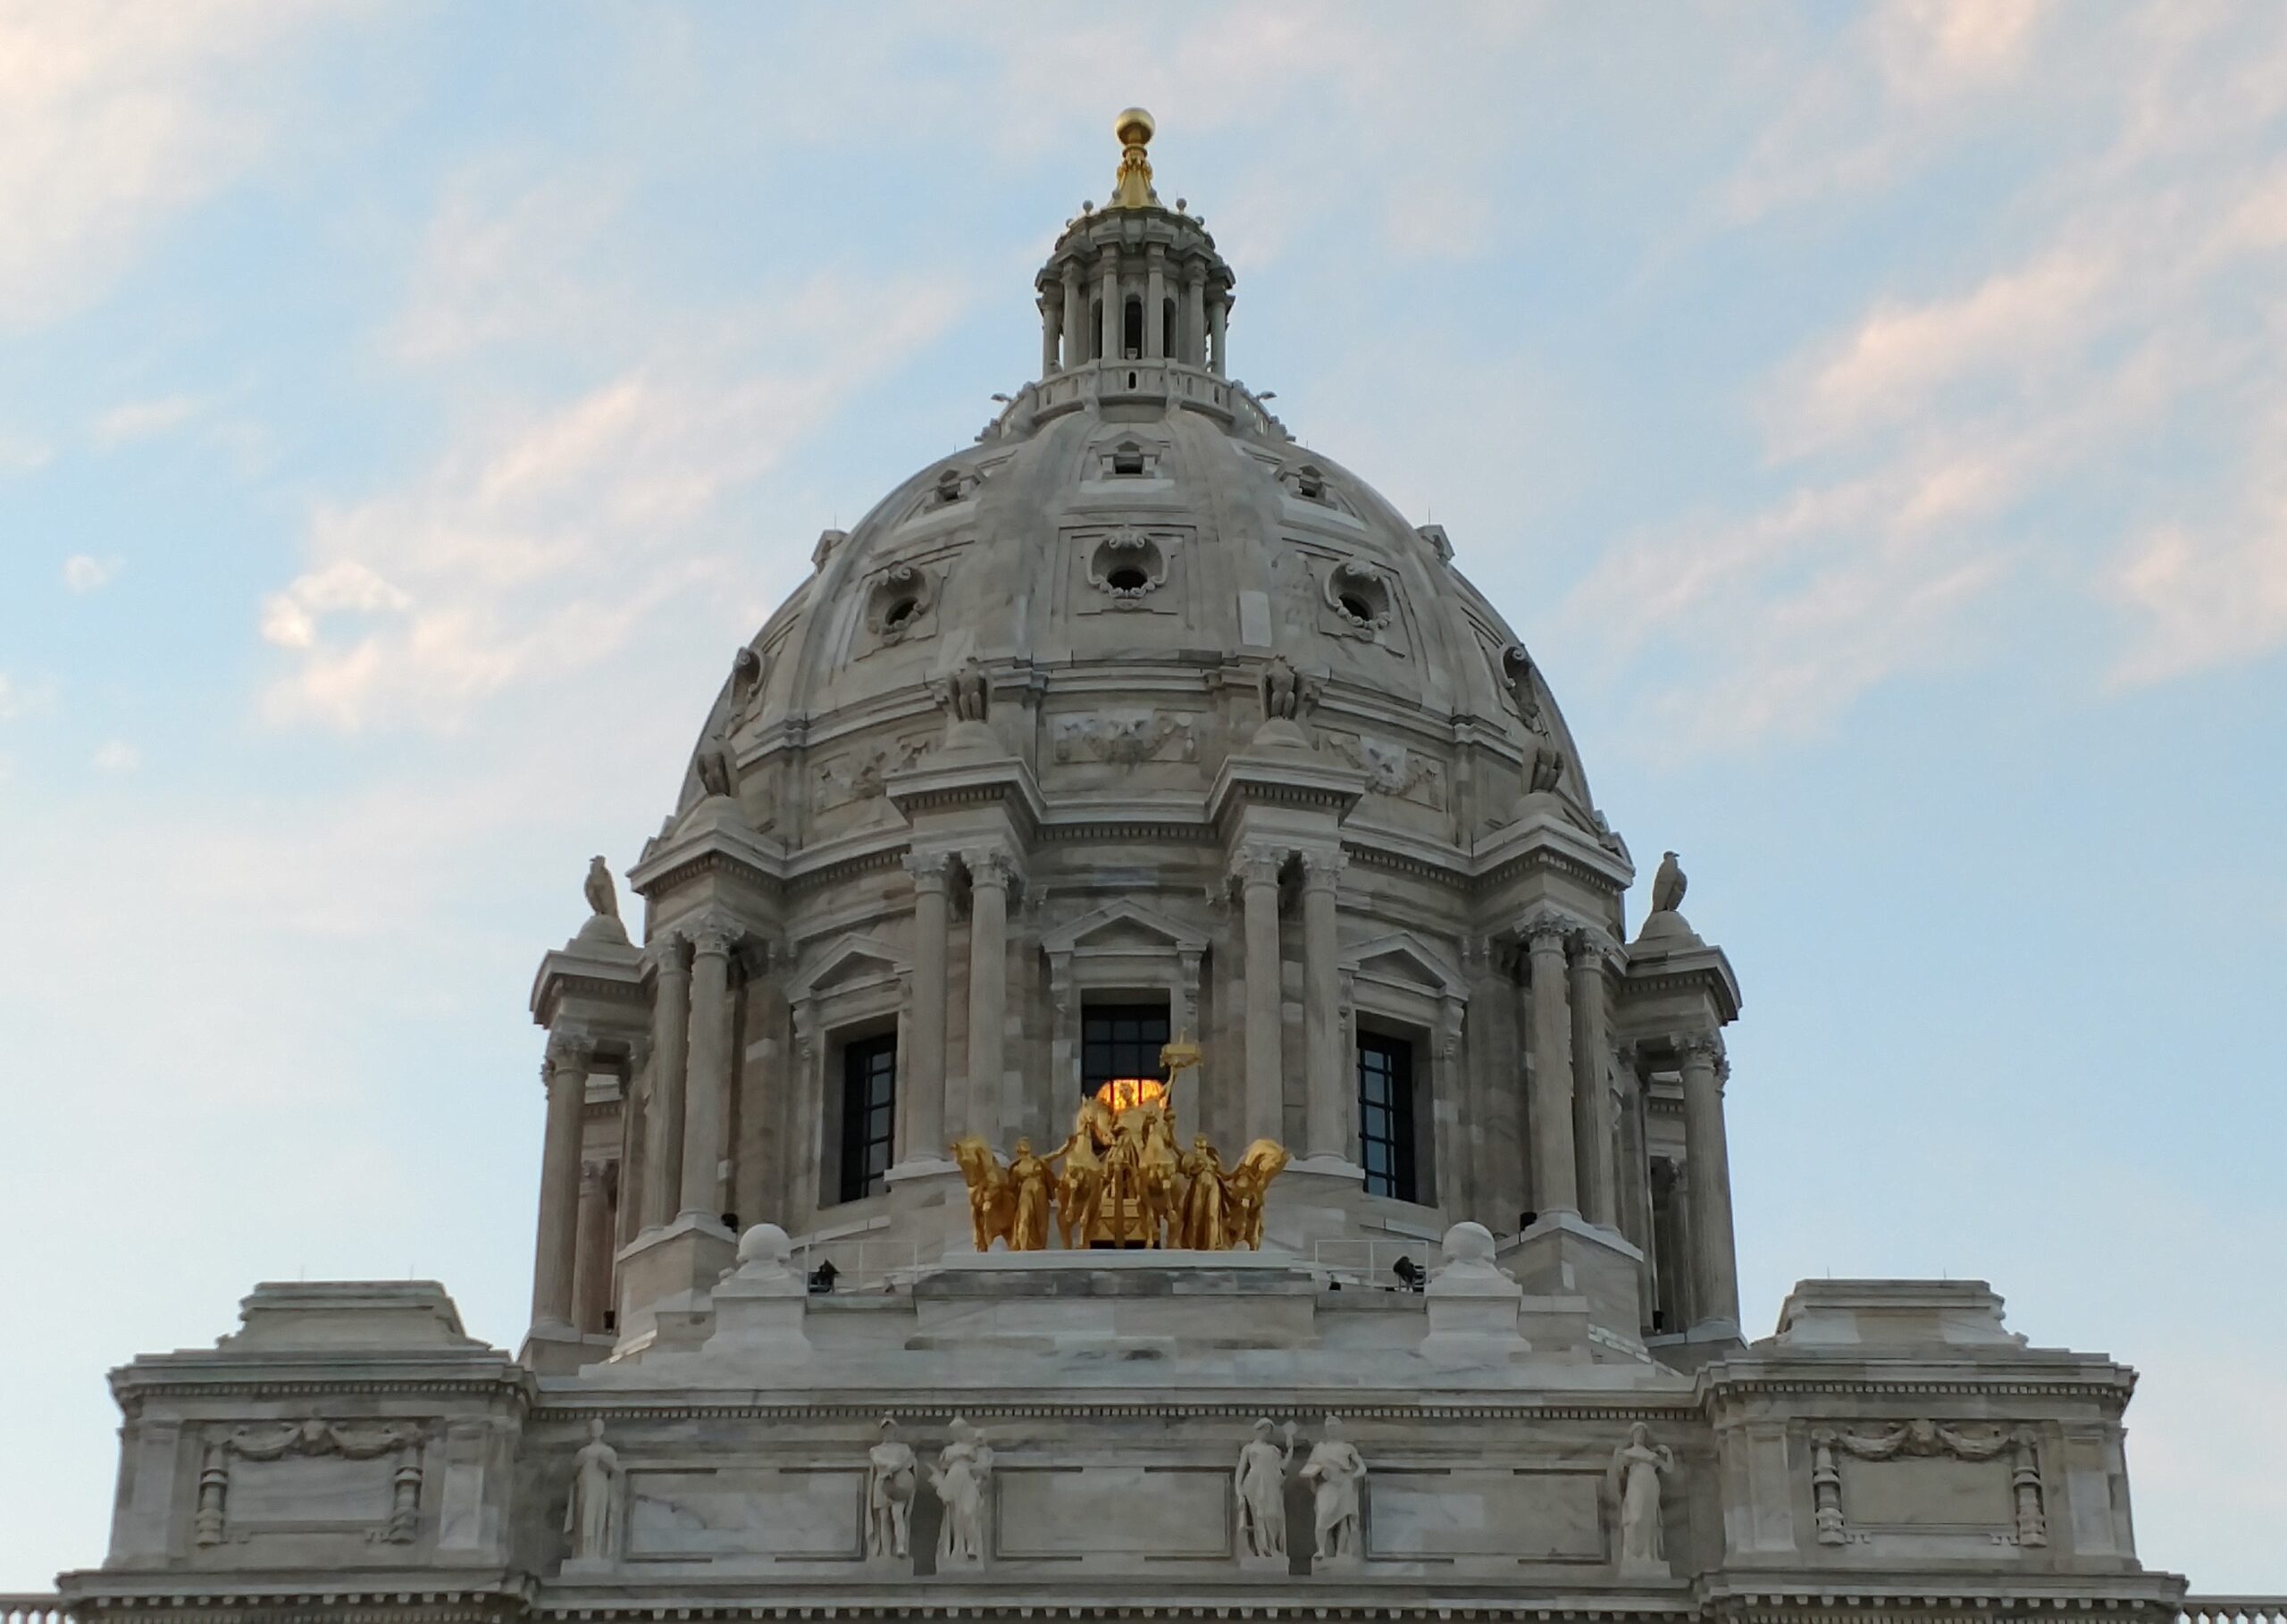 Dome of Minnesota State Capitol with lit chandelier inside